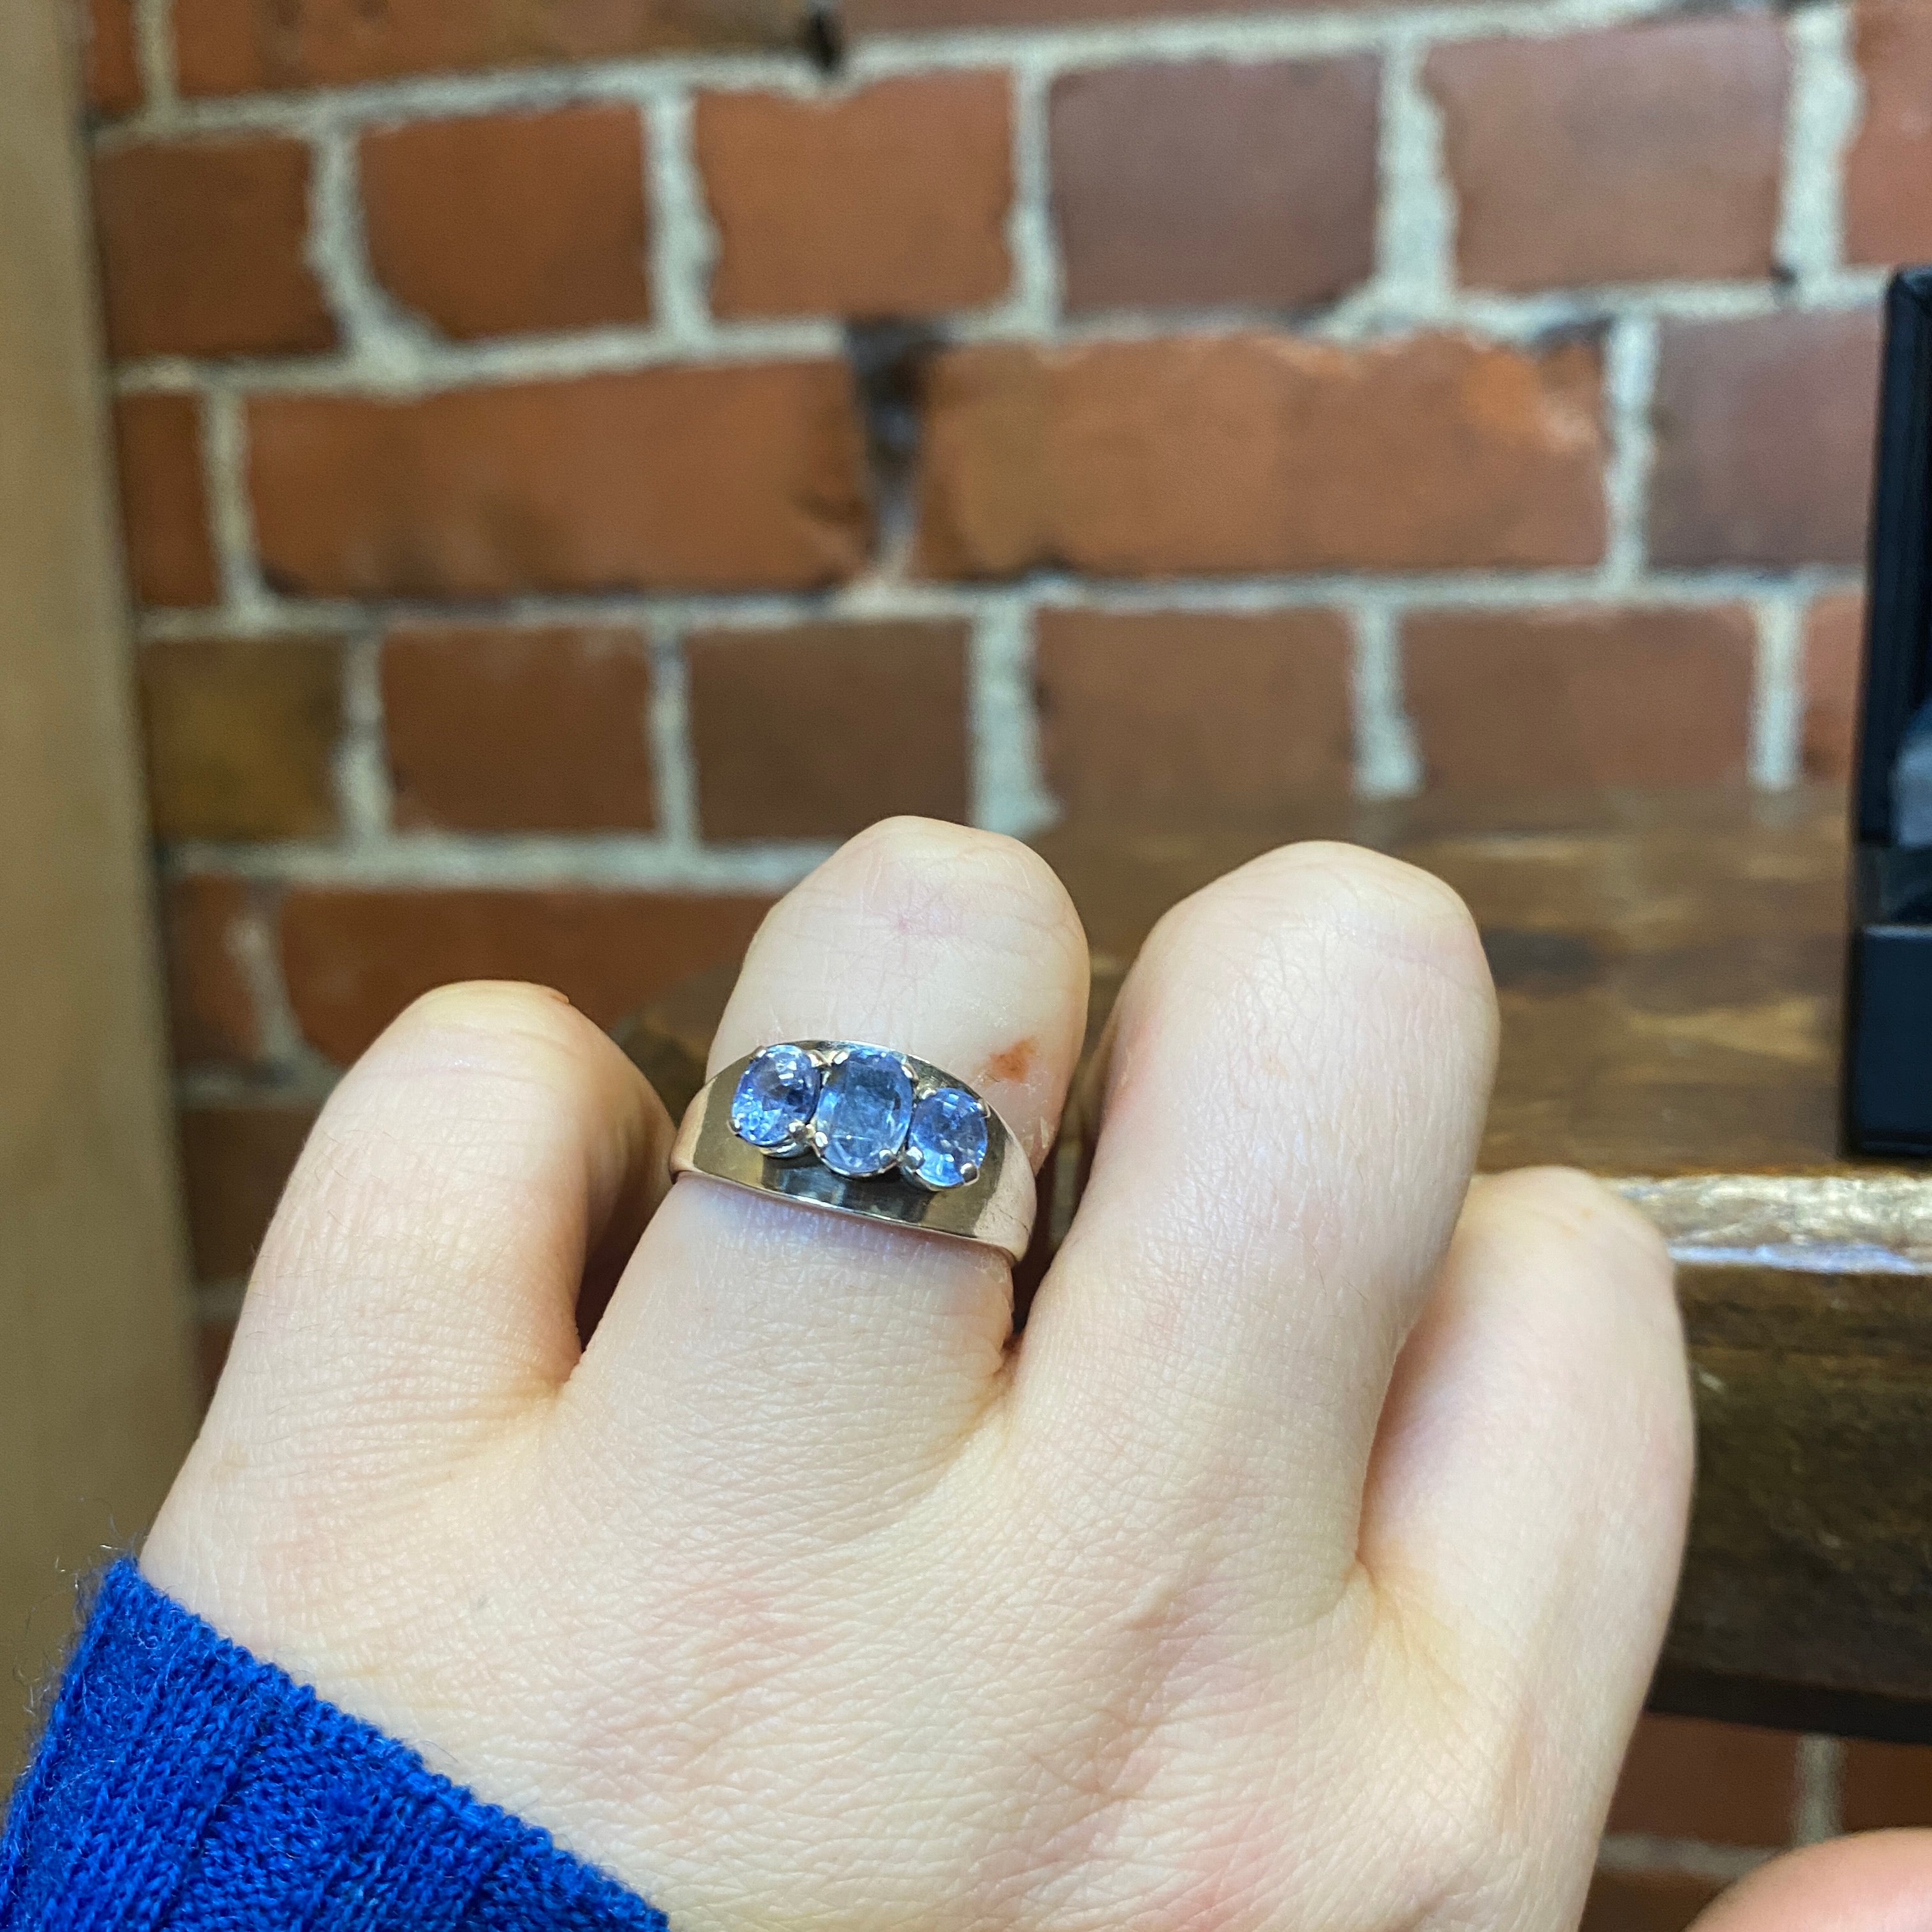 STG SILVER and blue topaz ring